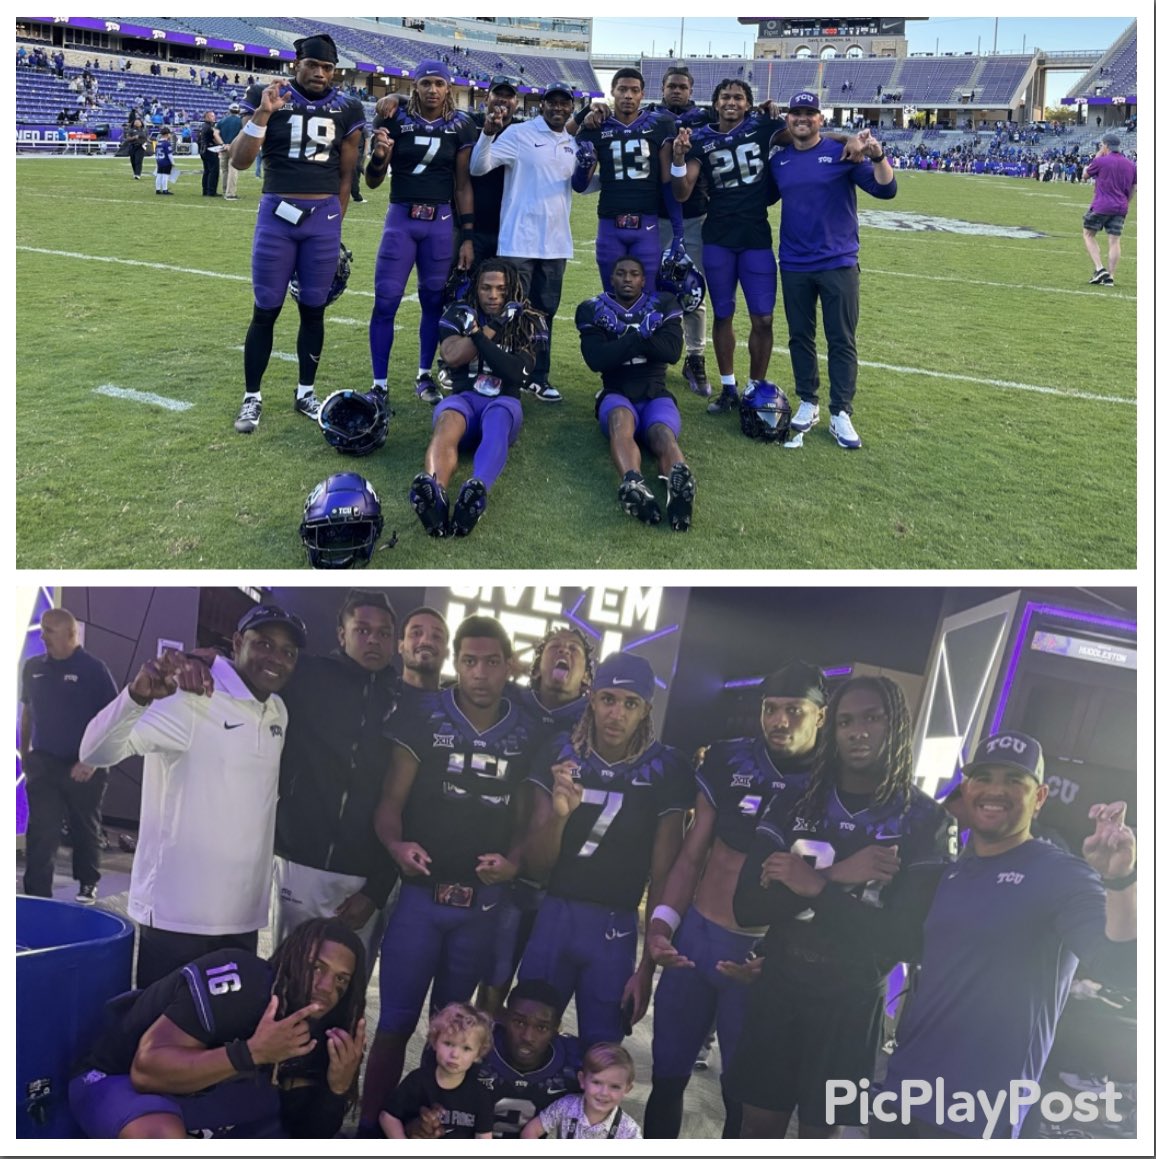 Great team win! @TCUFootball Super proud of these young men! 🐸🏈 #LockBoys